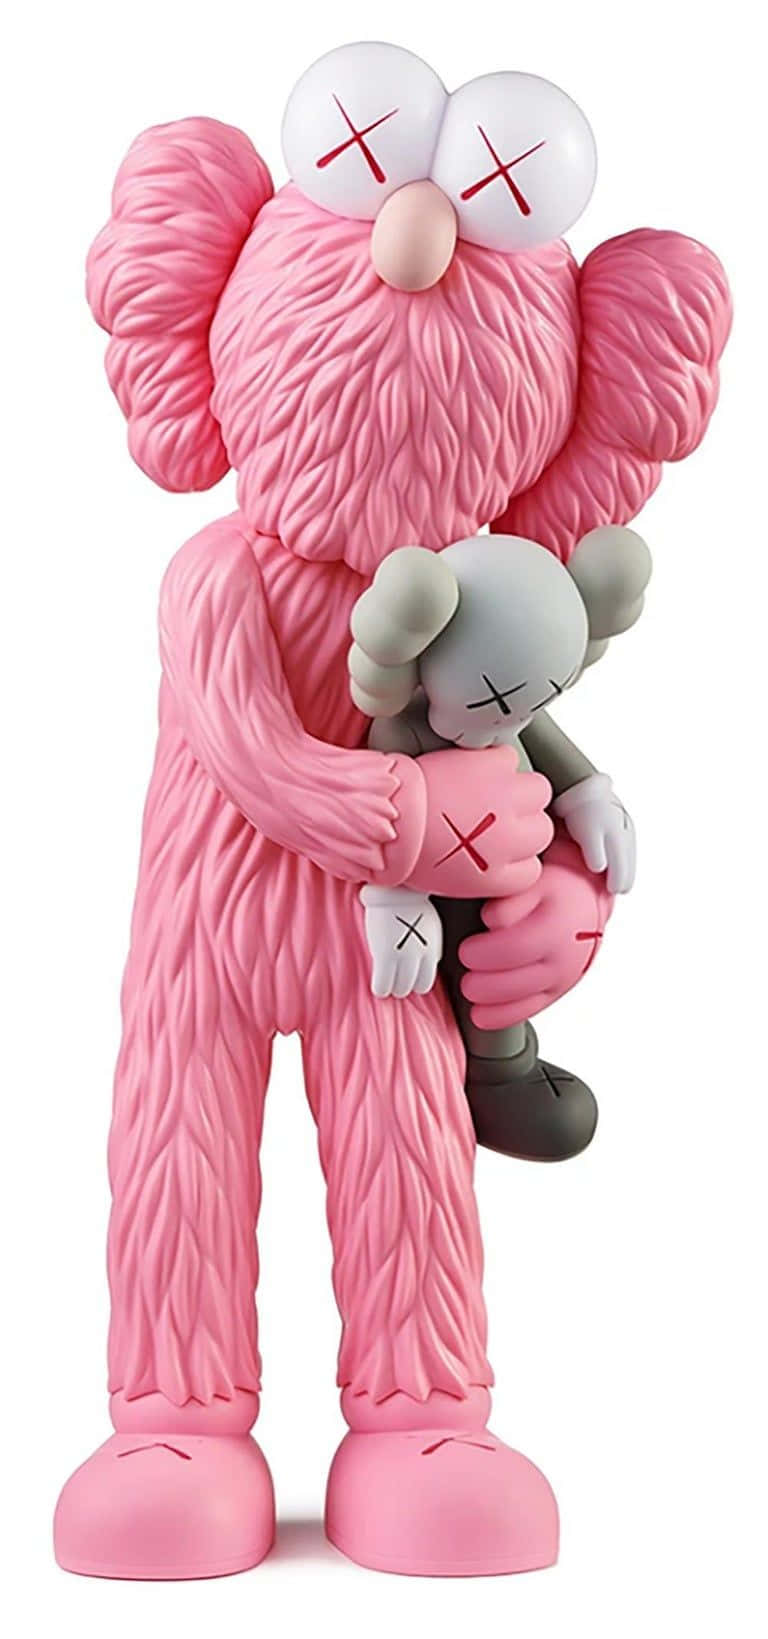 Limited-Edition KAWS Companion figurs in bright yellow